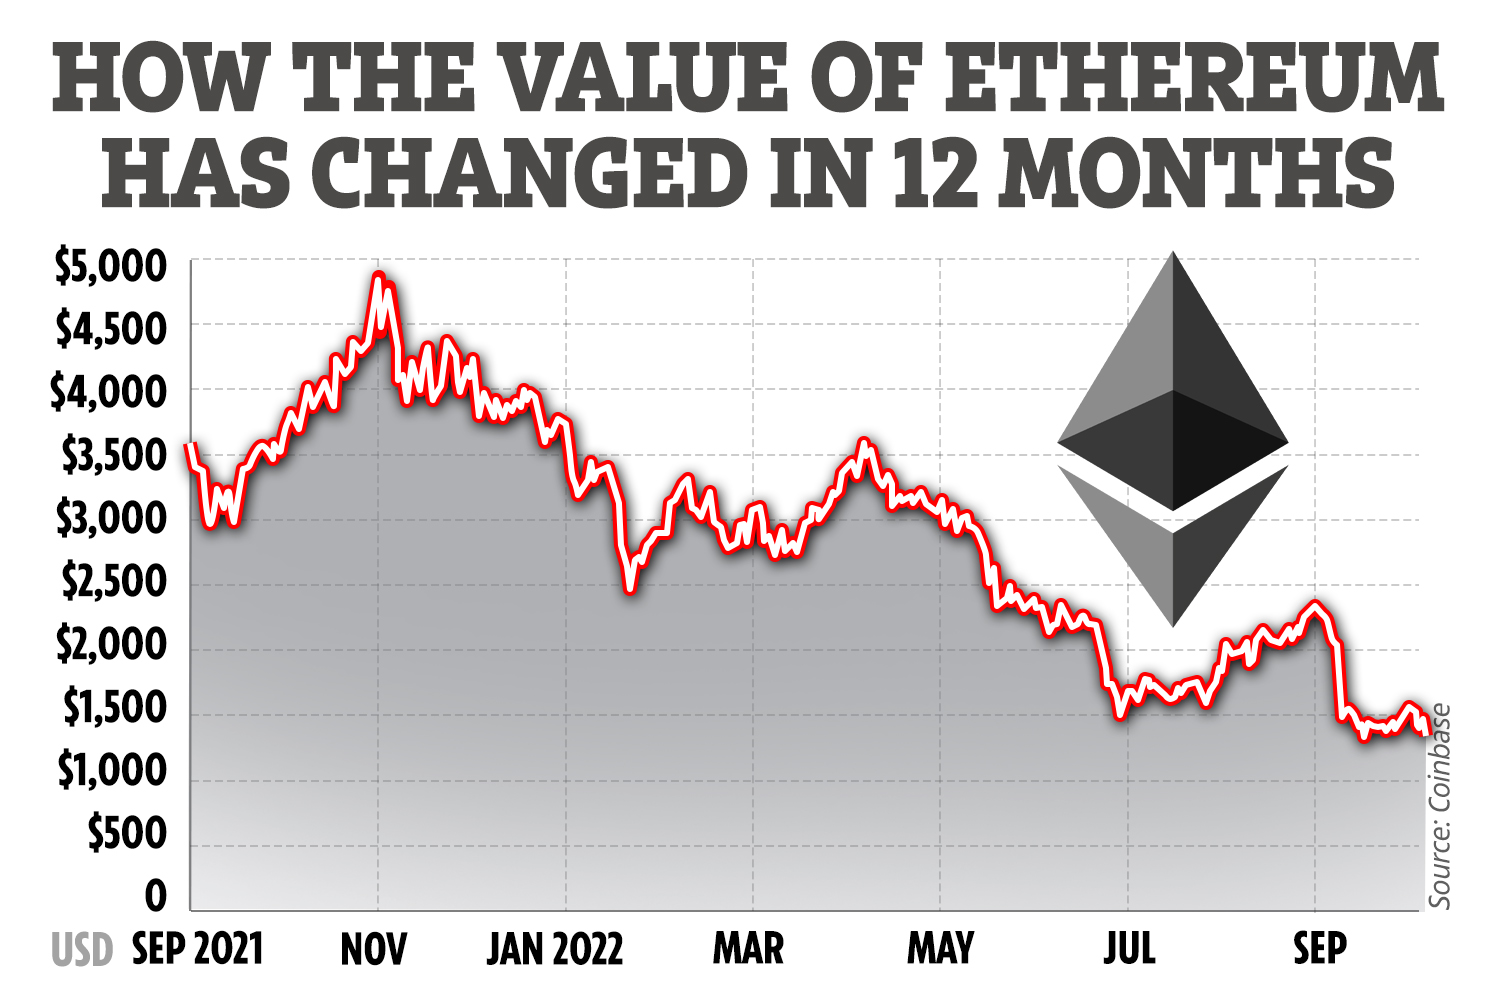 Ethereum Price Prediction A Good Investment?